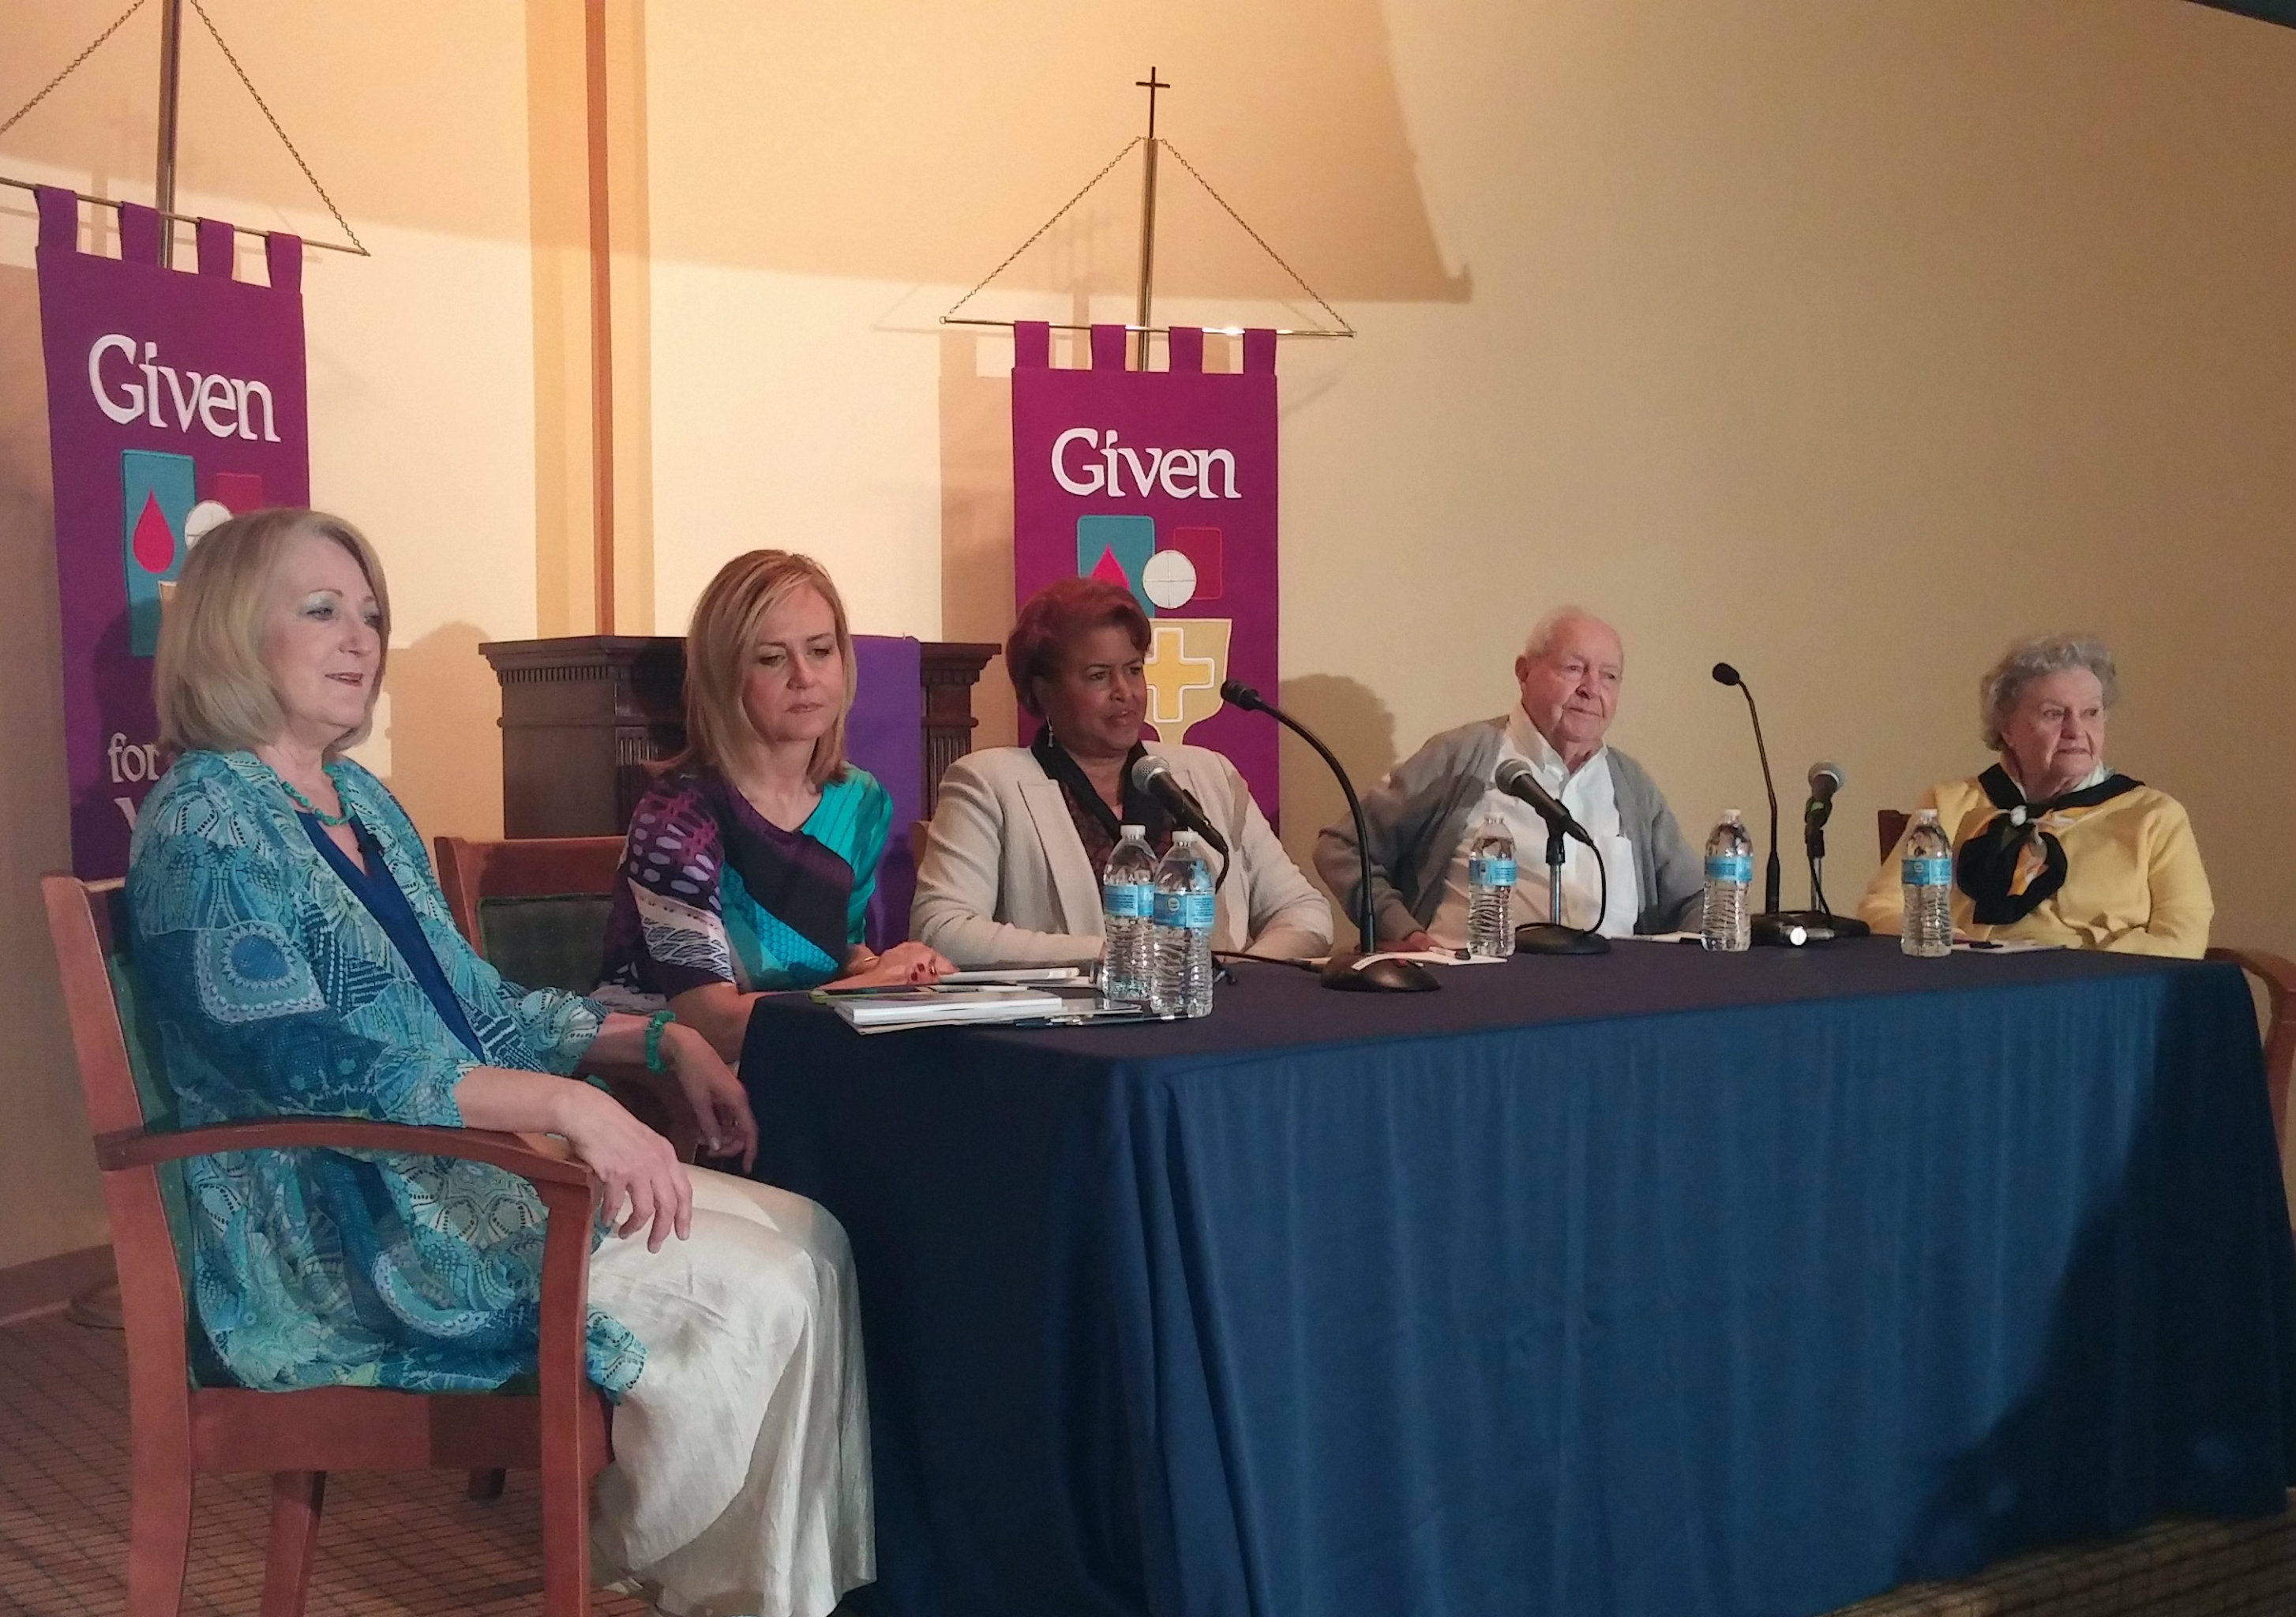 Buchanan (left) leads a panel discussion on issues of aging with Jane McGarry, Dorothy Roberts, Ed Gray, and Ann Holmes.